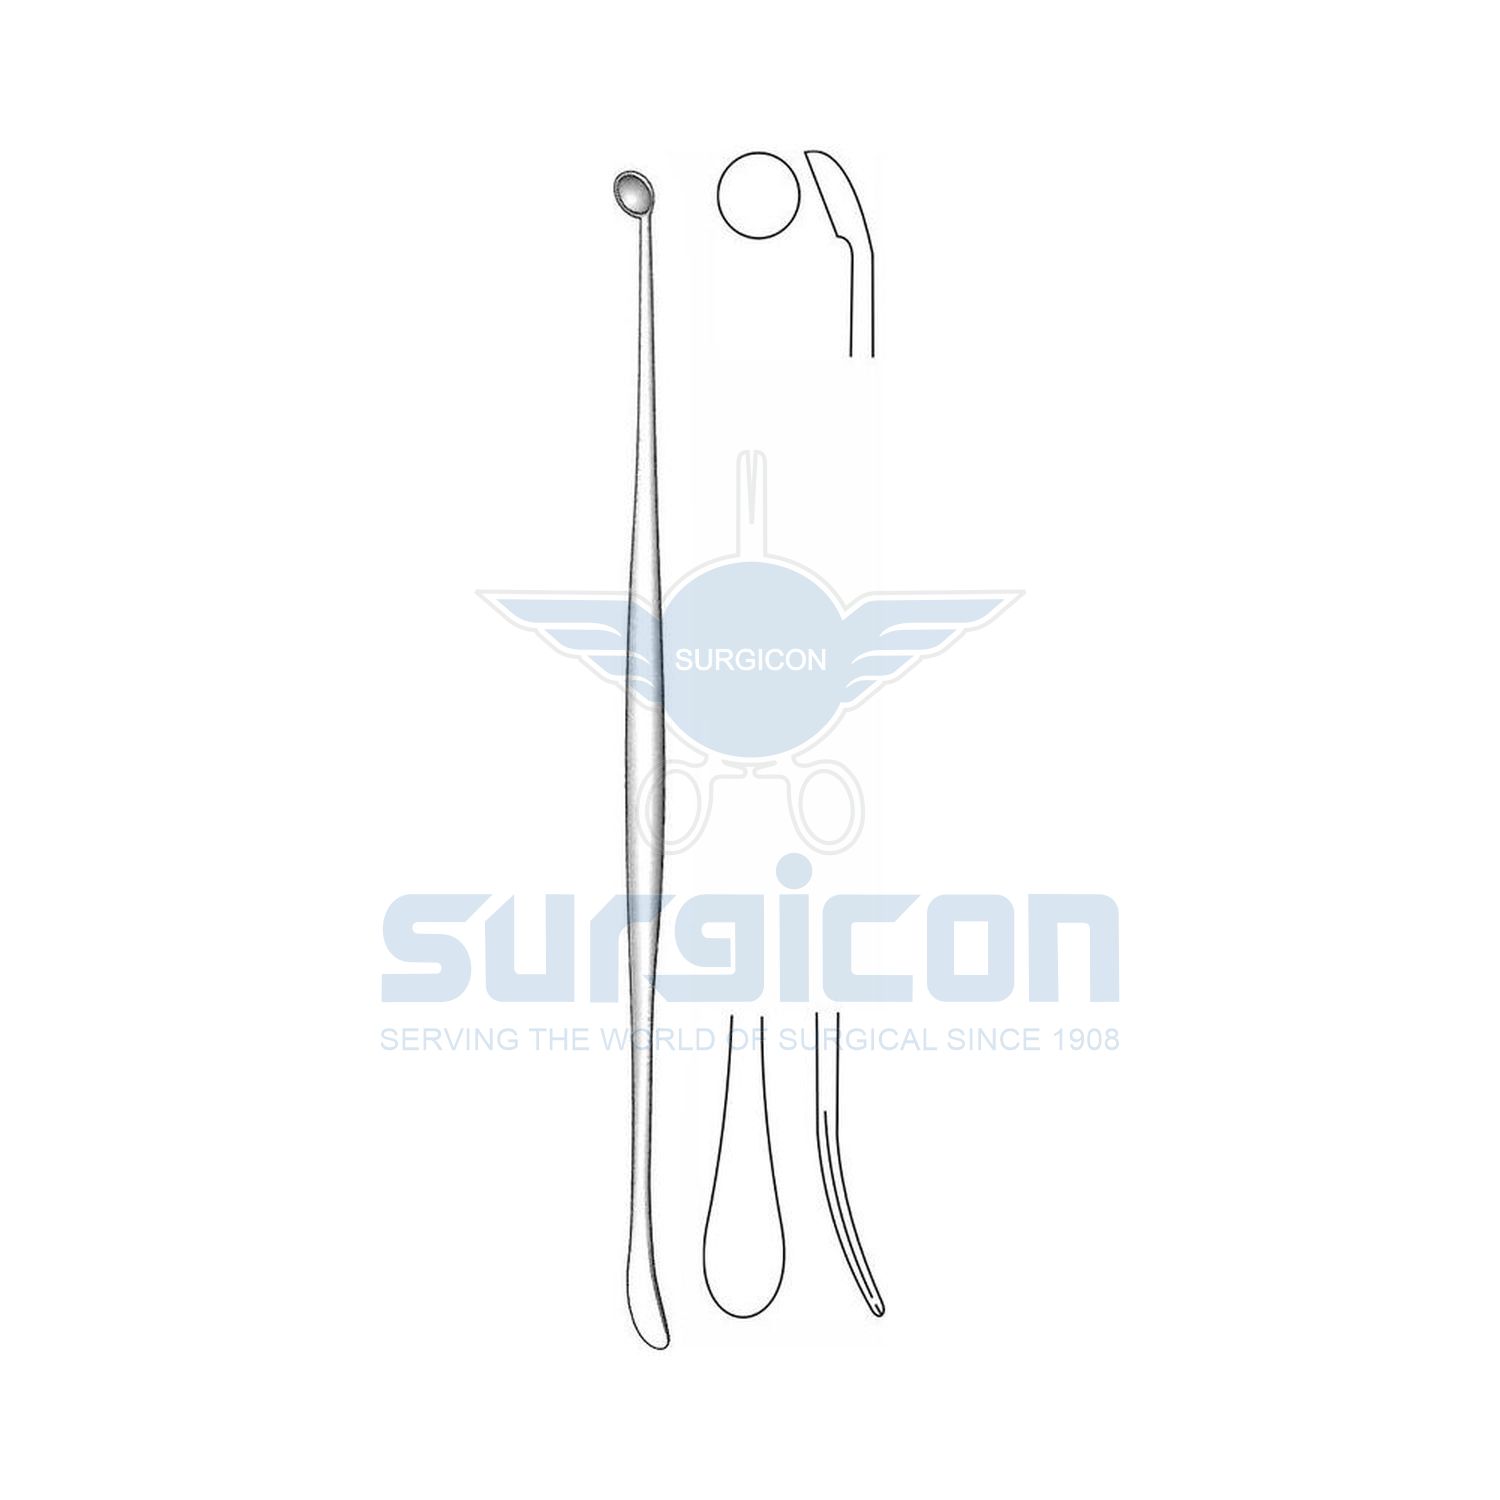 Penfield-Dissector-J-25-402